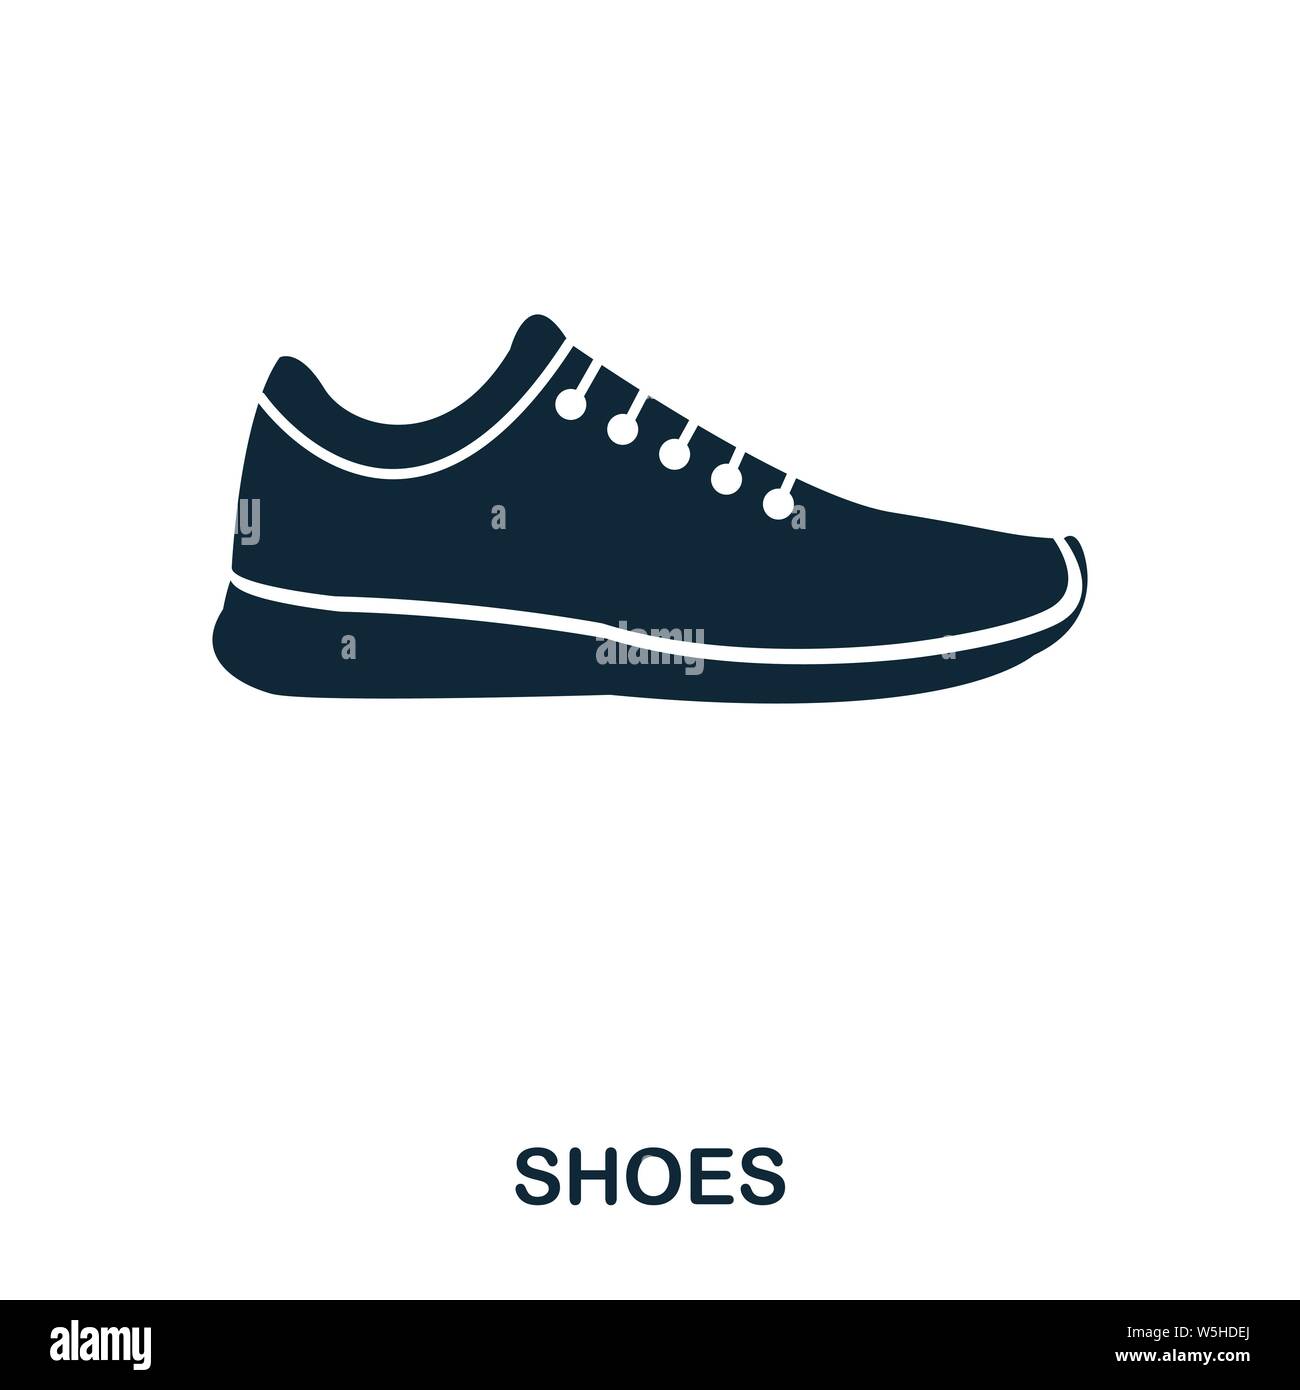 Shoes icon. Flat style icon design. UI. Illustration of shoes icon. Pictogram isolated on white. Ready to use in web design, apps, software, print. Stock Vector